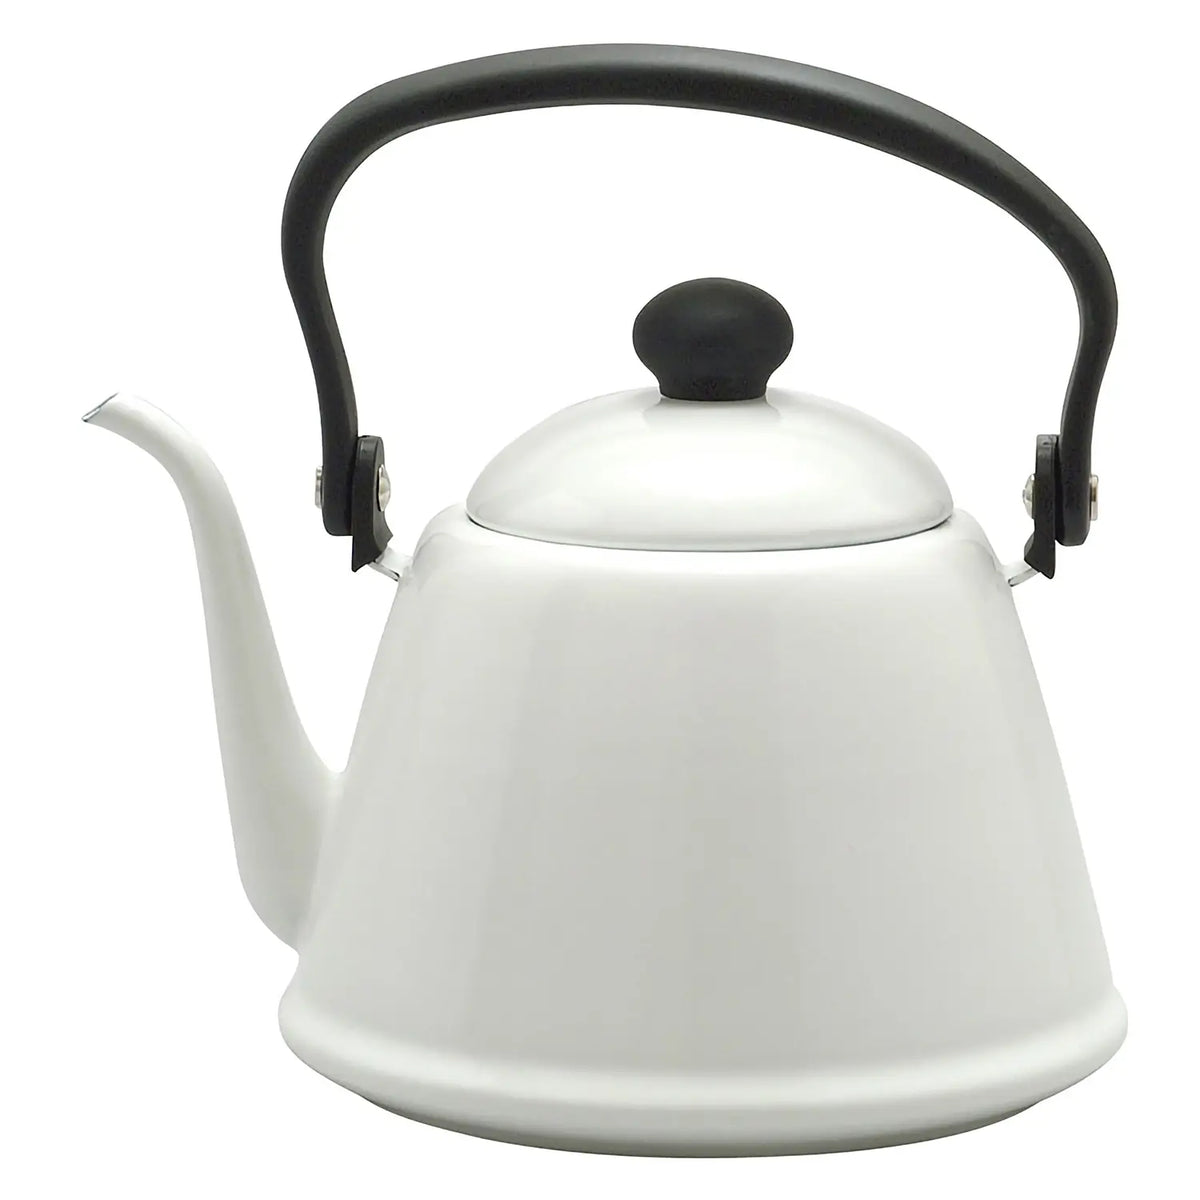 Noda Horo Enamelware Induction Pour Over Brewing Kettle 2.0L